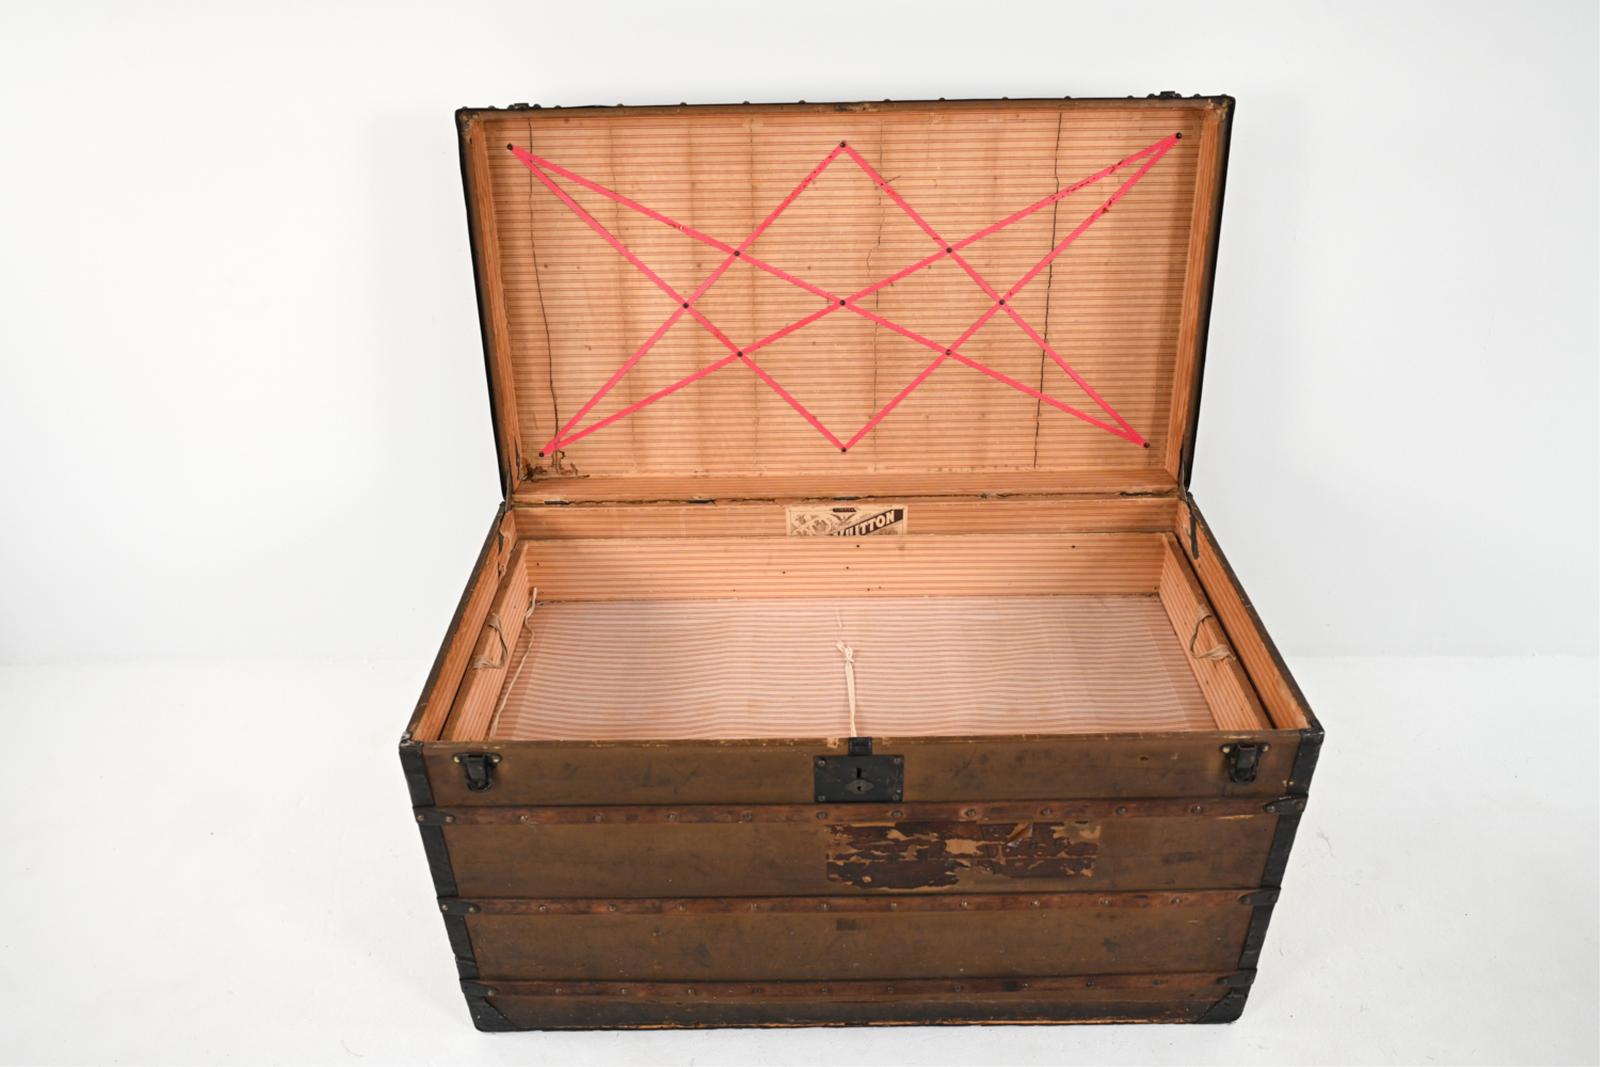 Sold at Auction: EARLY LOUIS VUITTON TRIANON STEAMER TRUNK C. 1889